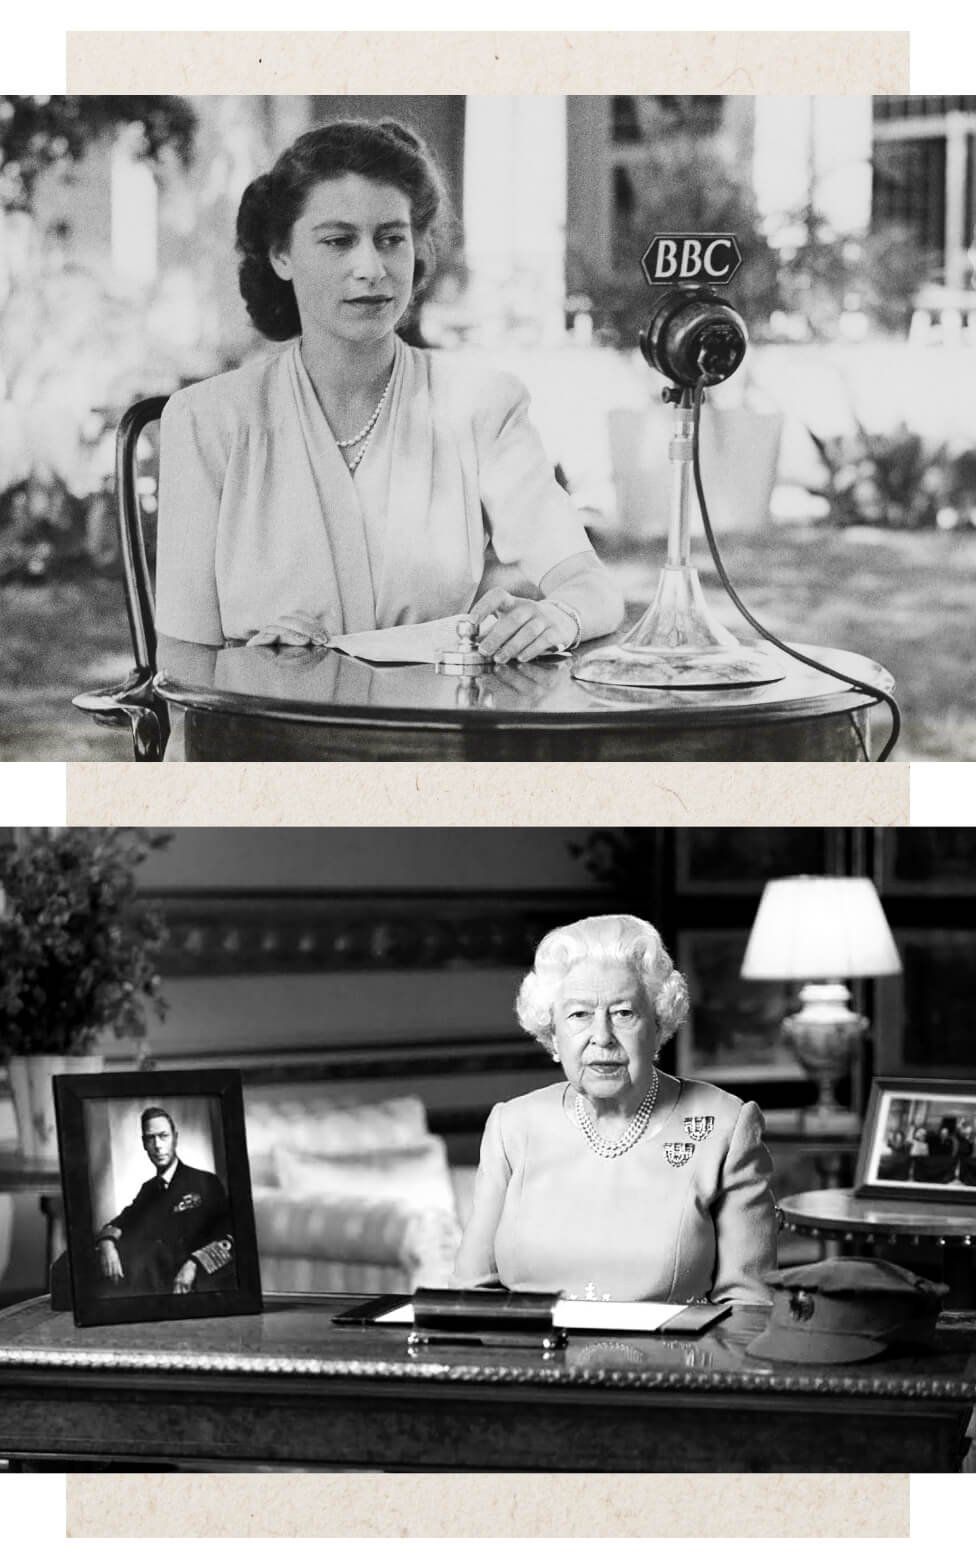 Two pictures of Queen Elizabeth II, the top one is her aged 21 at before a radio microphone, the bottom one is her say at a desk with a picture of her father next to her